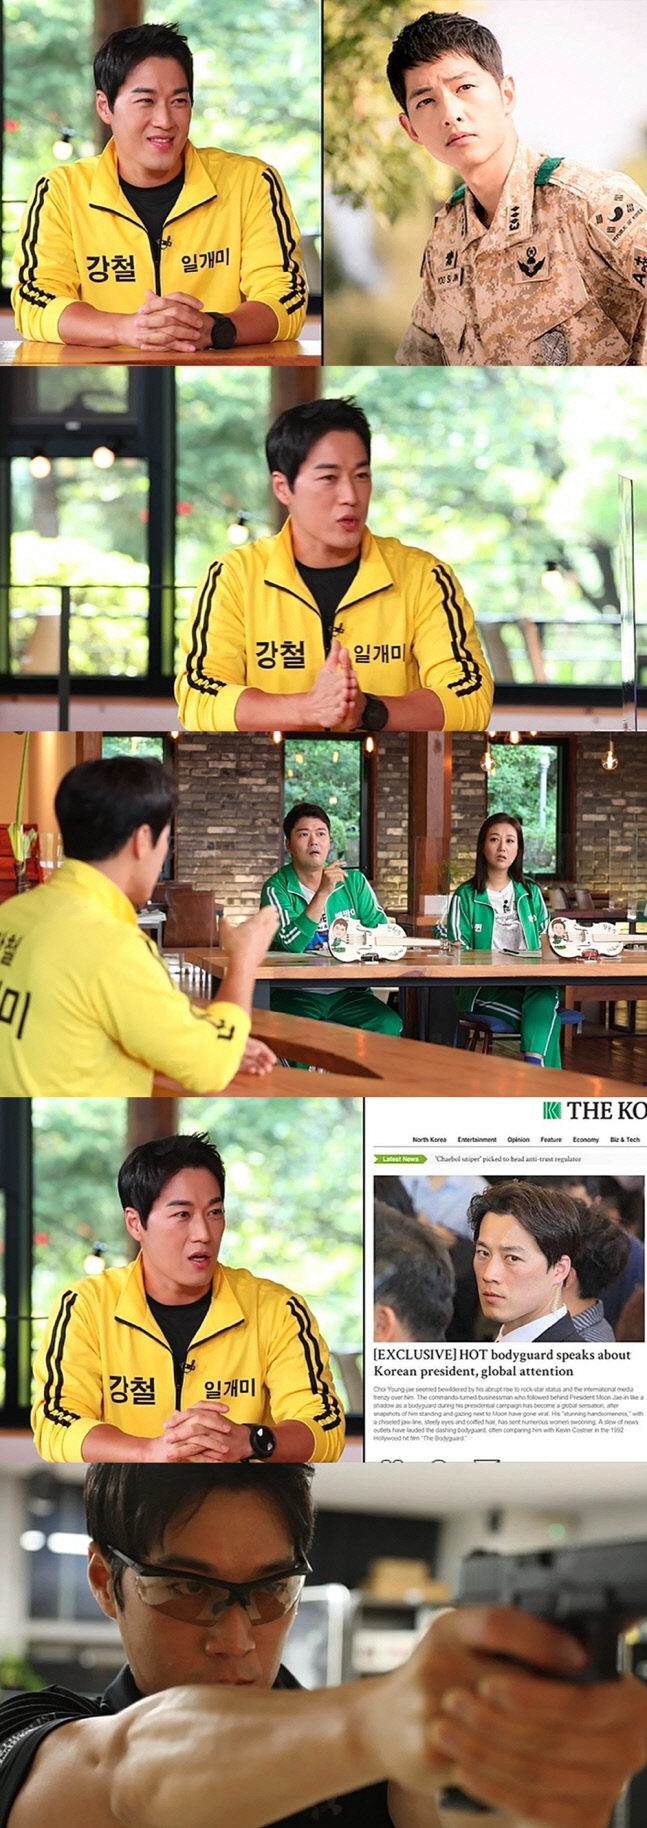 MBN ant-playing ball, which will be broadcasted at 11 pm on the 30th, will reveal the past, when military expert Choi Young-jae appeared and became famous as a handsome bodyguard.On this day, Choi Young-jae makes a studio girl feel sick with his appearance as a movie star.Everyones eyes are languid with Parks introduction as a model of the popular drama Song Joong-ki.He then unravels the stories that have become famous for visuals and focuses everyones attention.In particular, he also reveals the behind-the-scenes story of a topic that made SNS shake.In 2017, when he was a candidate for President Moon Jae-in, he was famous for his photographs taken by chance.From the birth process of the photo, MCs were surprised by the extraordinary episodes of this.In addition, Choi Young-jaes daily life, which led to the reputation of the richest job among the most frequent guests in history, is also a point of observation.His intense work in various fields, including military experts, kids cafe CEOs, and hair designers, is surprising.In the endless careers of Choi Young-jae, Jang Yoon-jung is curious because he shouts, How many subcharacters are there?What is the episode related to the Smile of a handsome bodyguard, how passionate his daily life is with his tongue, and the 11th MBN ant-playing ball, which Choi Young-jae of Steel Master will be broadcast at 11 pm on the 30th.Photo  MBN ant-playing ball